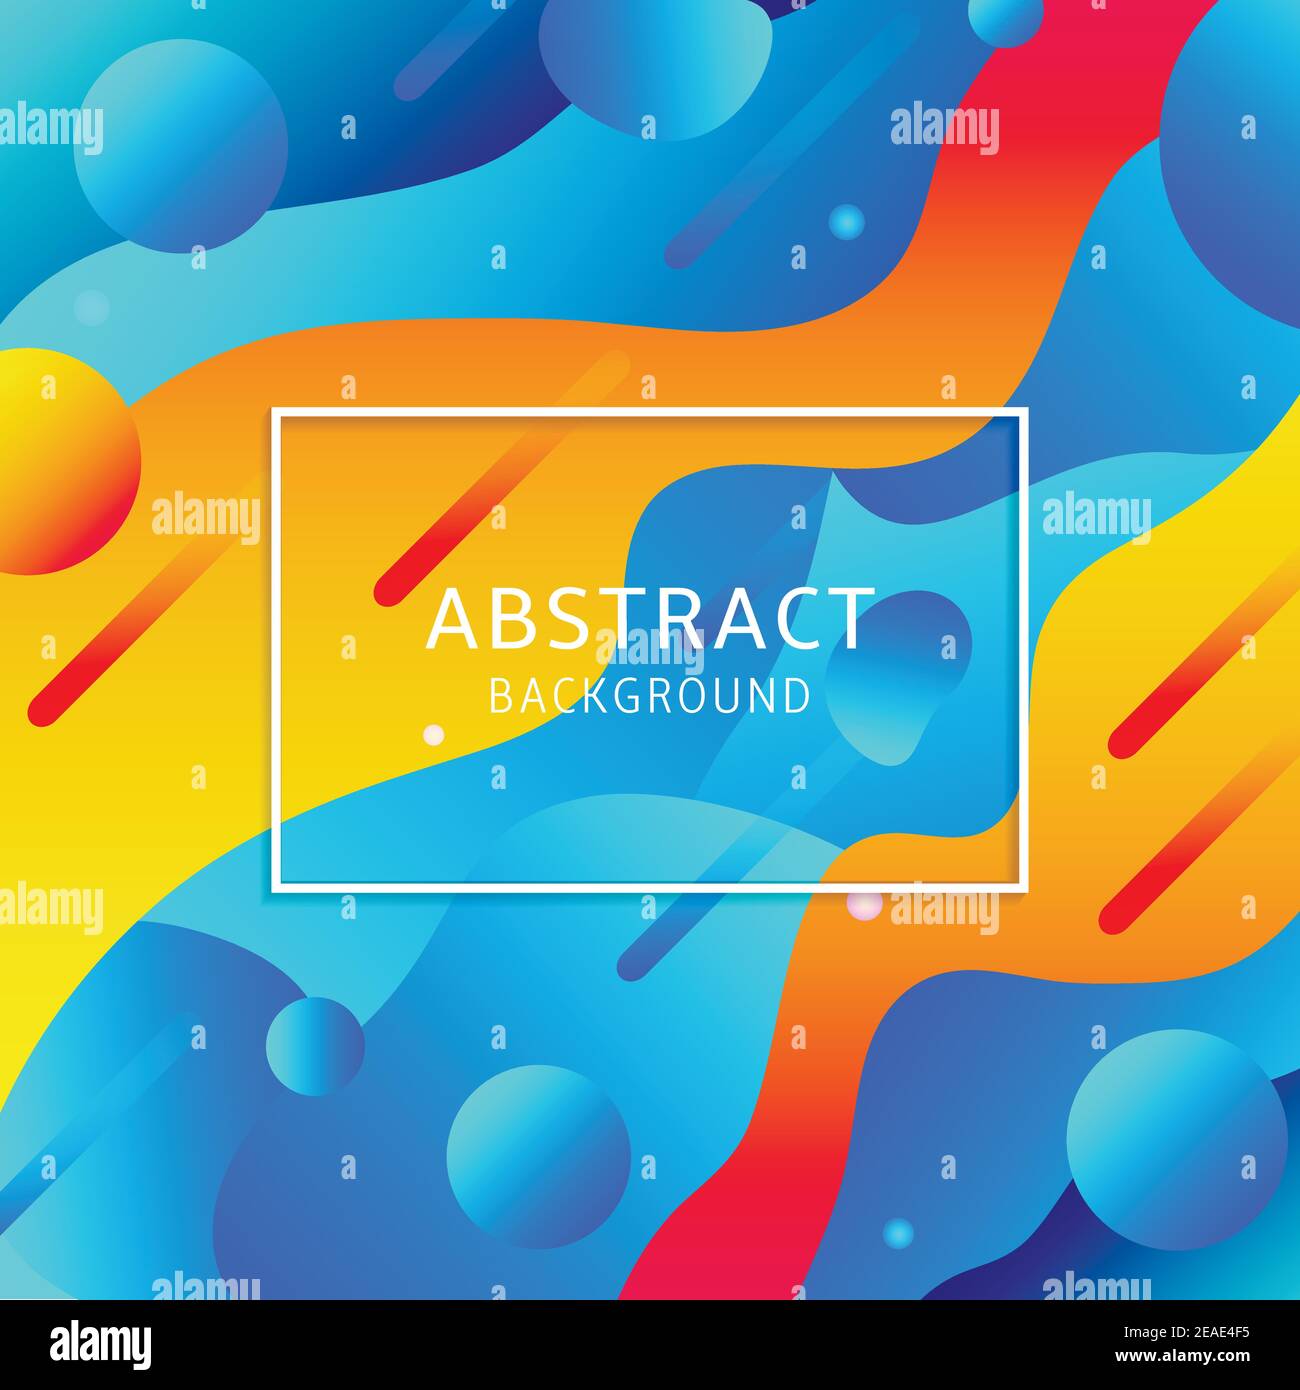 Liquid dynamic background for web sites, landing page or business presentation. Abstract geometric wallpaper. Stock Vector